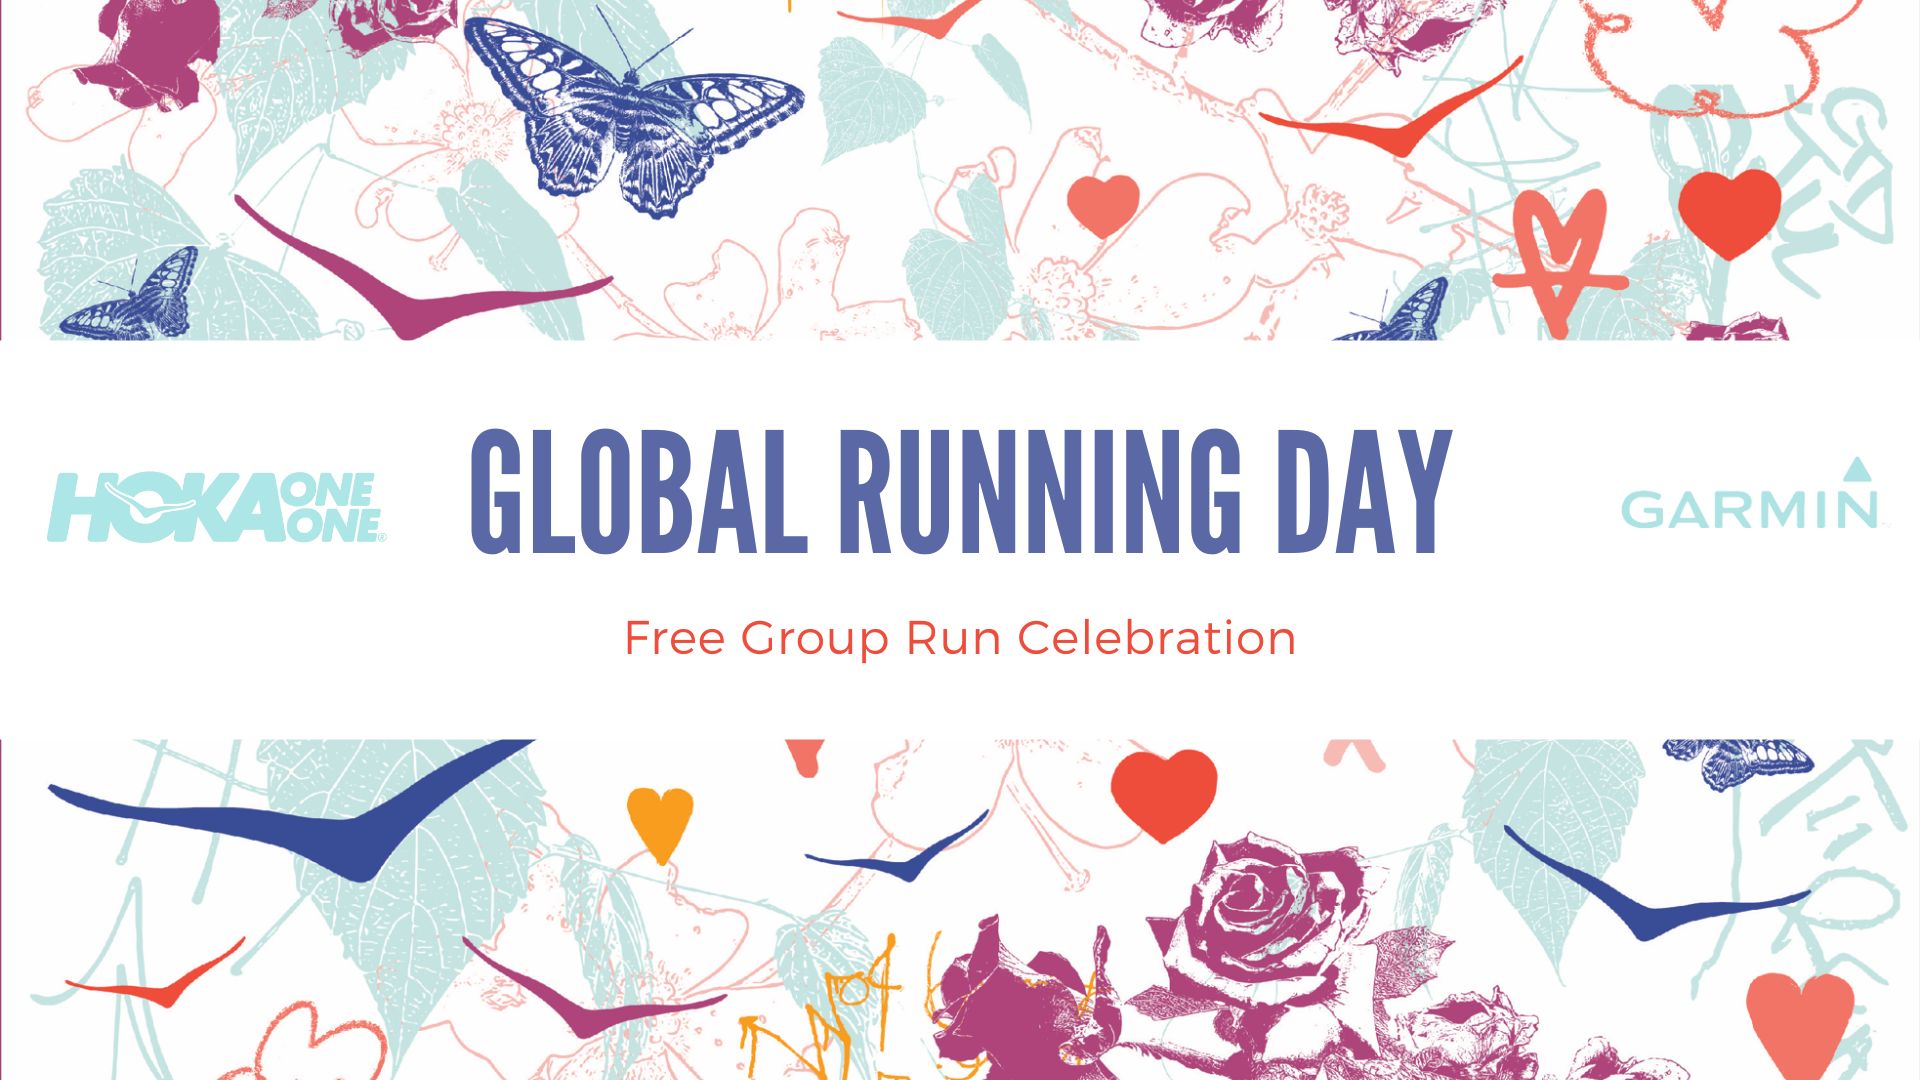 Global Running Day Mission